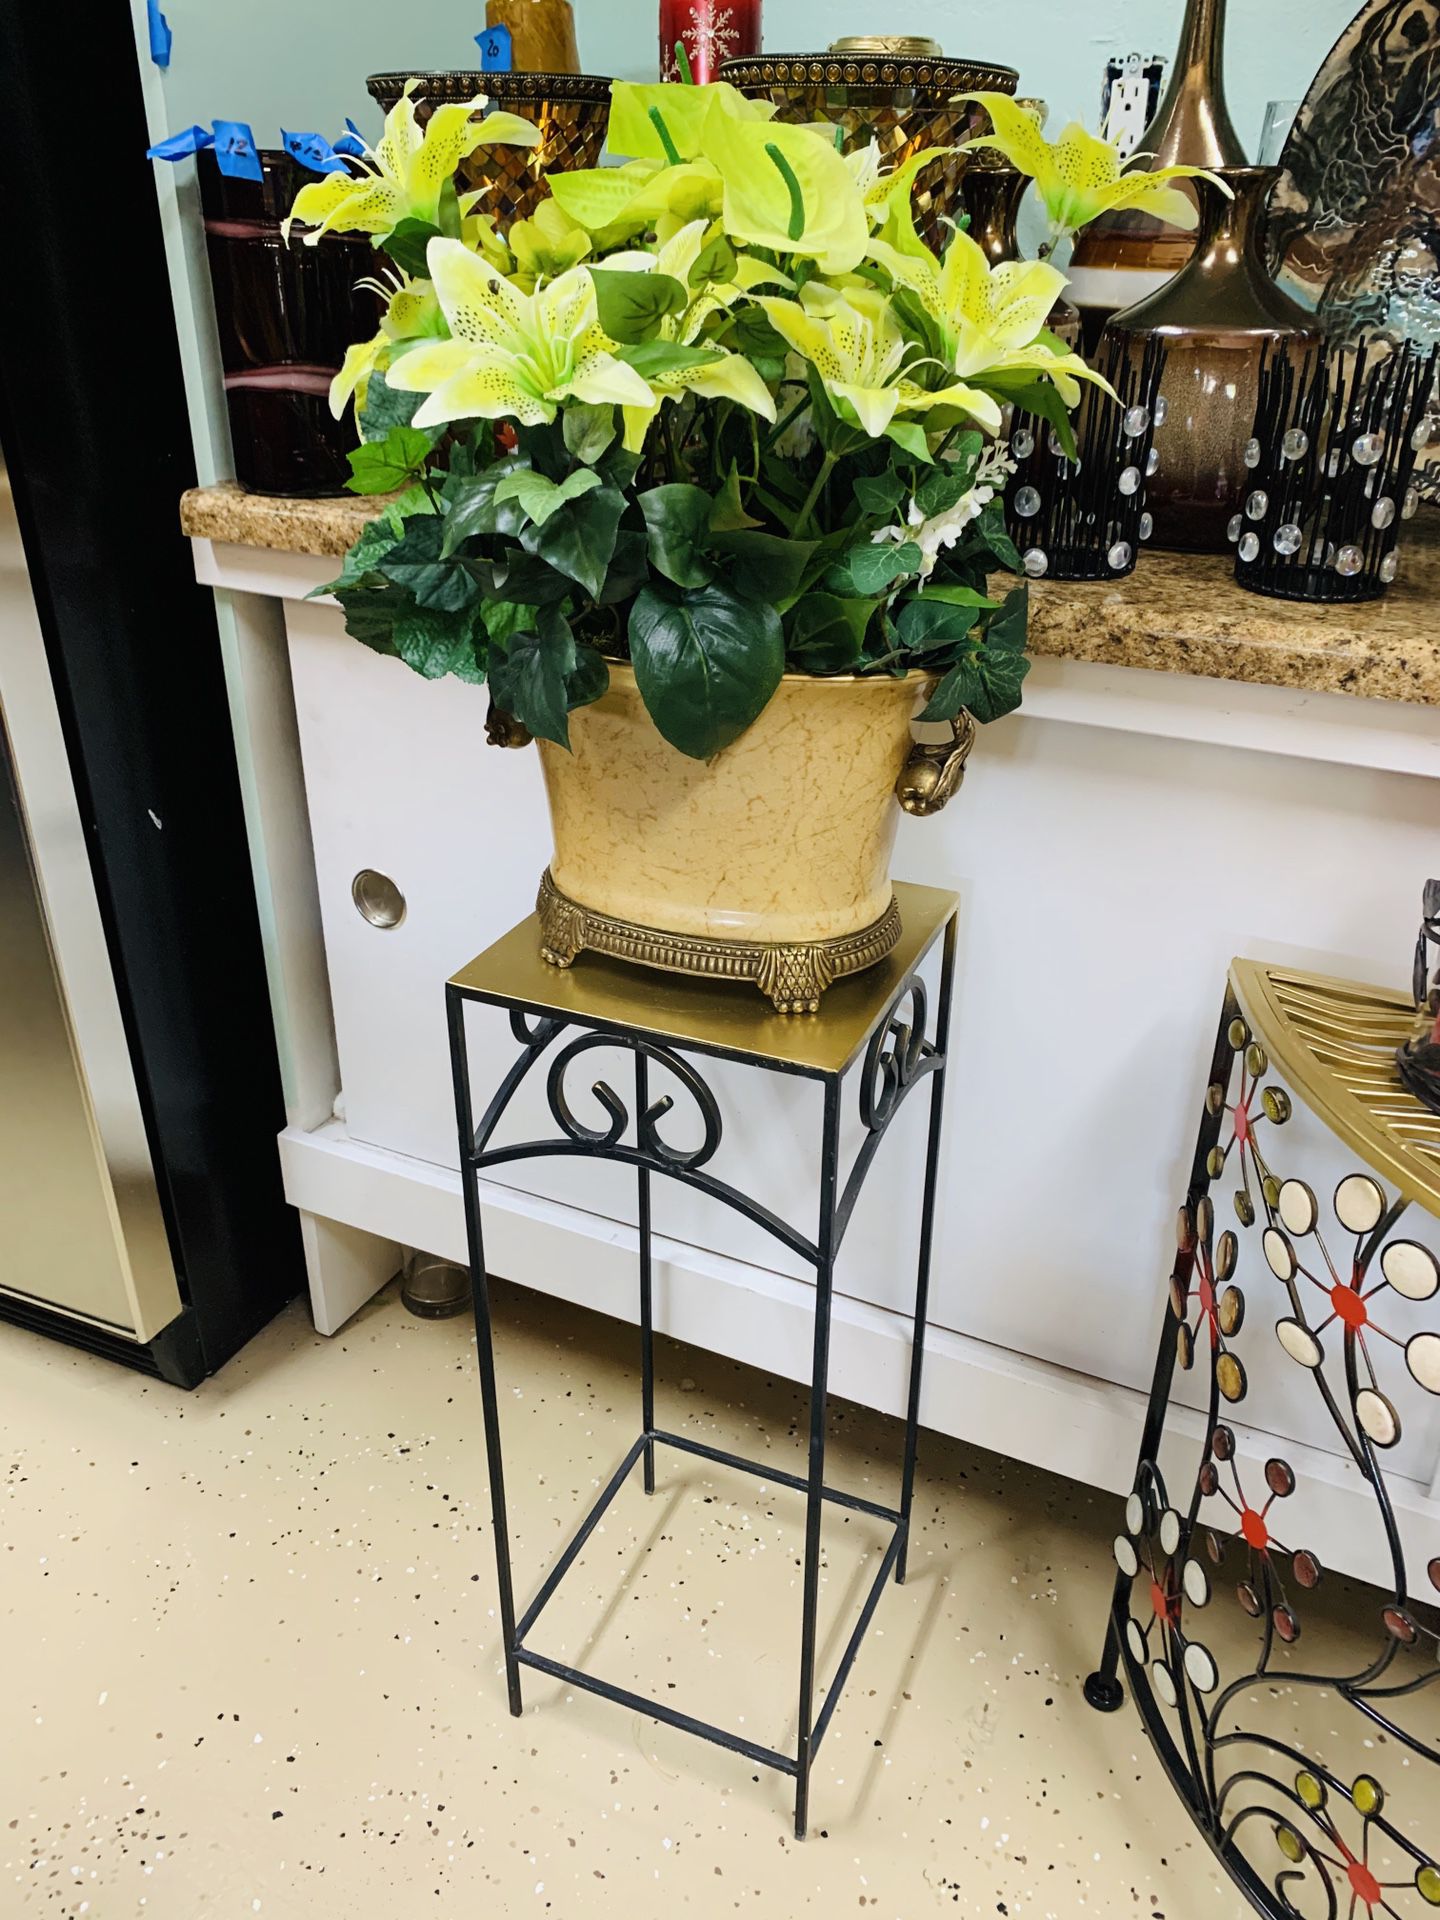 Beautiful flowers arrangement clean like new large ceramics vase smooth and shiny with sturdy solid plant stand everything for $60